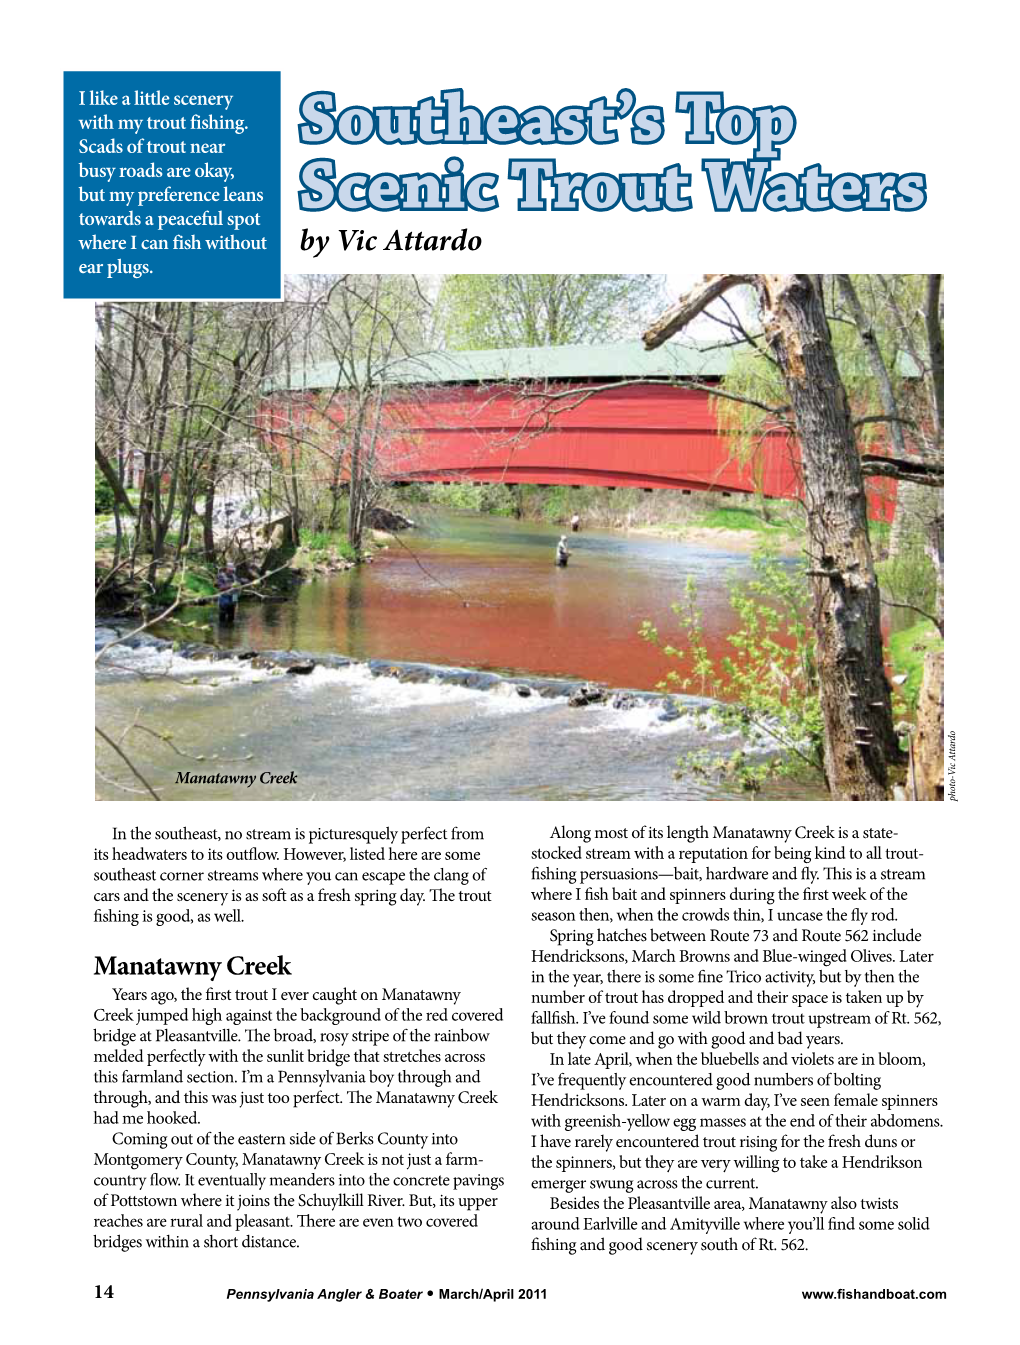 Southeast's Top Scenic Trout Waters